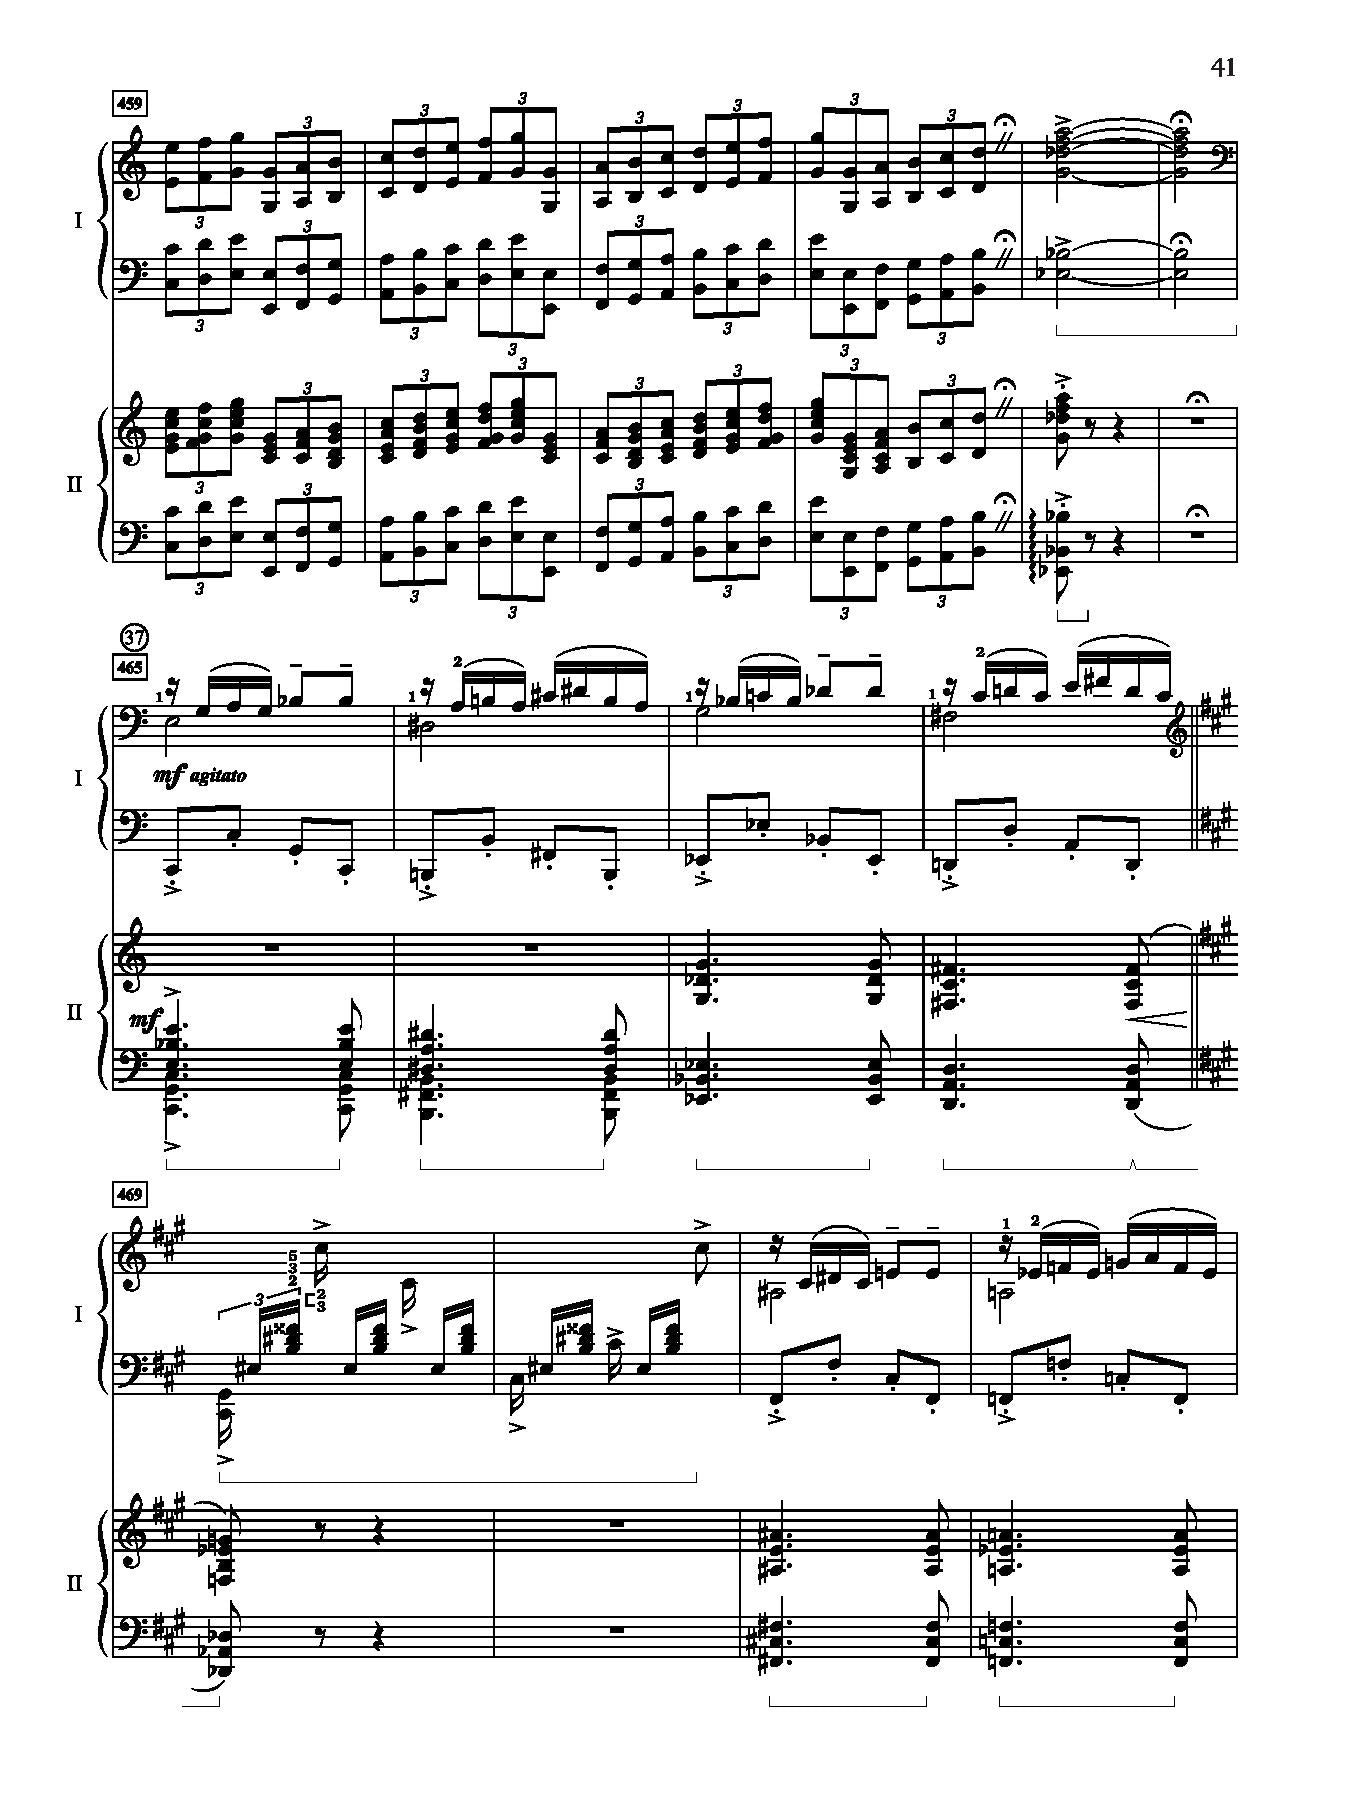 Gershwin: Rhapsody in Blue For Piano Solo and Orchestra (Arranged for Second Piano)